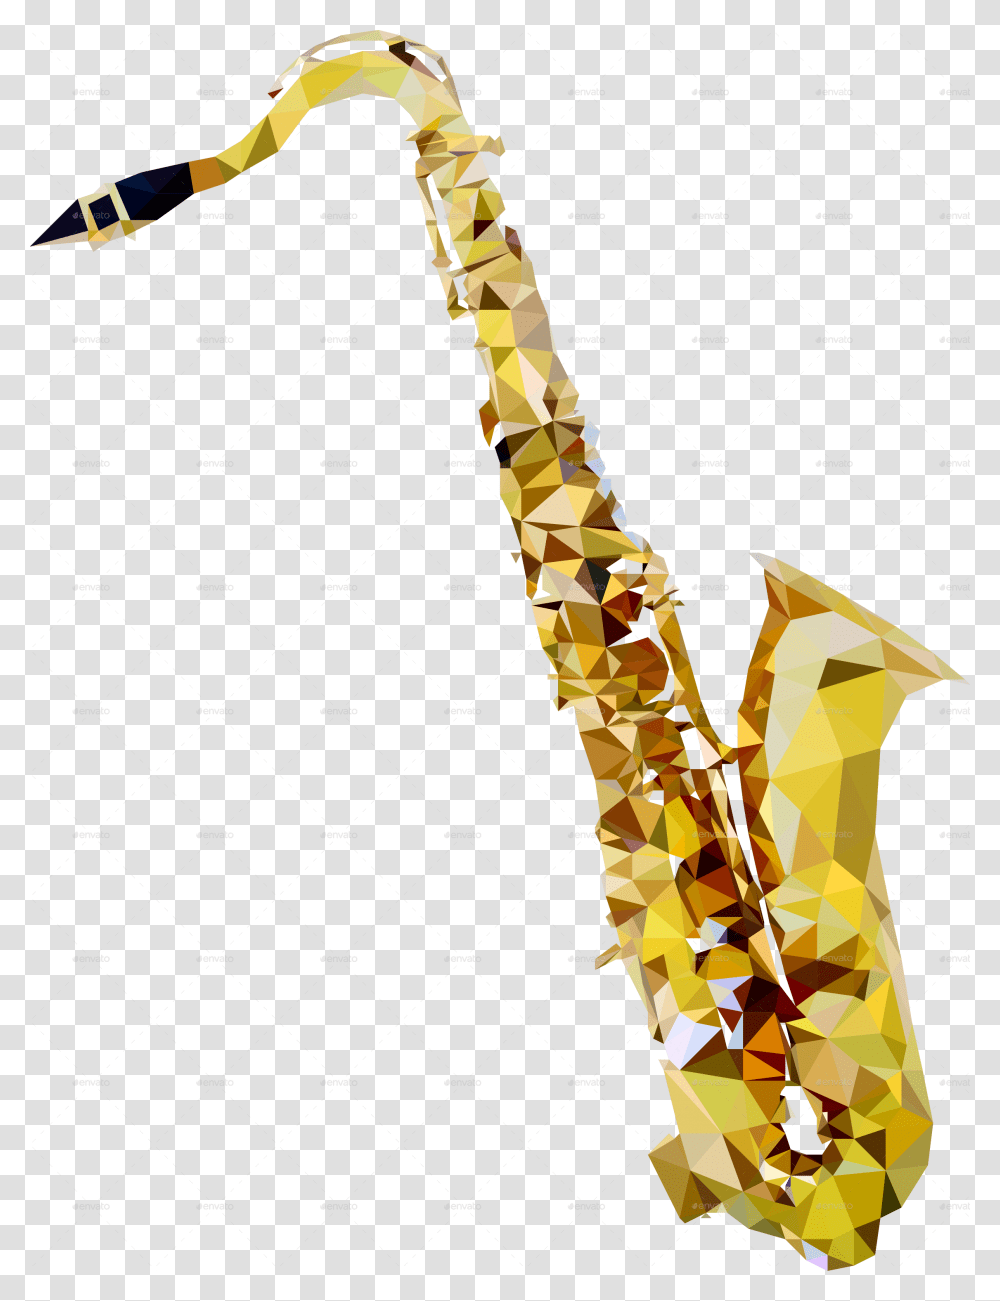 Saxophone Vector Music Instruments Low Poly, Musical Instrument, Leisure Activities, Clarinet Transparent Png